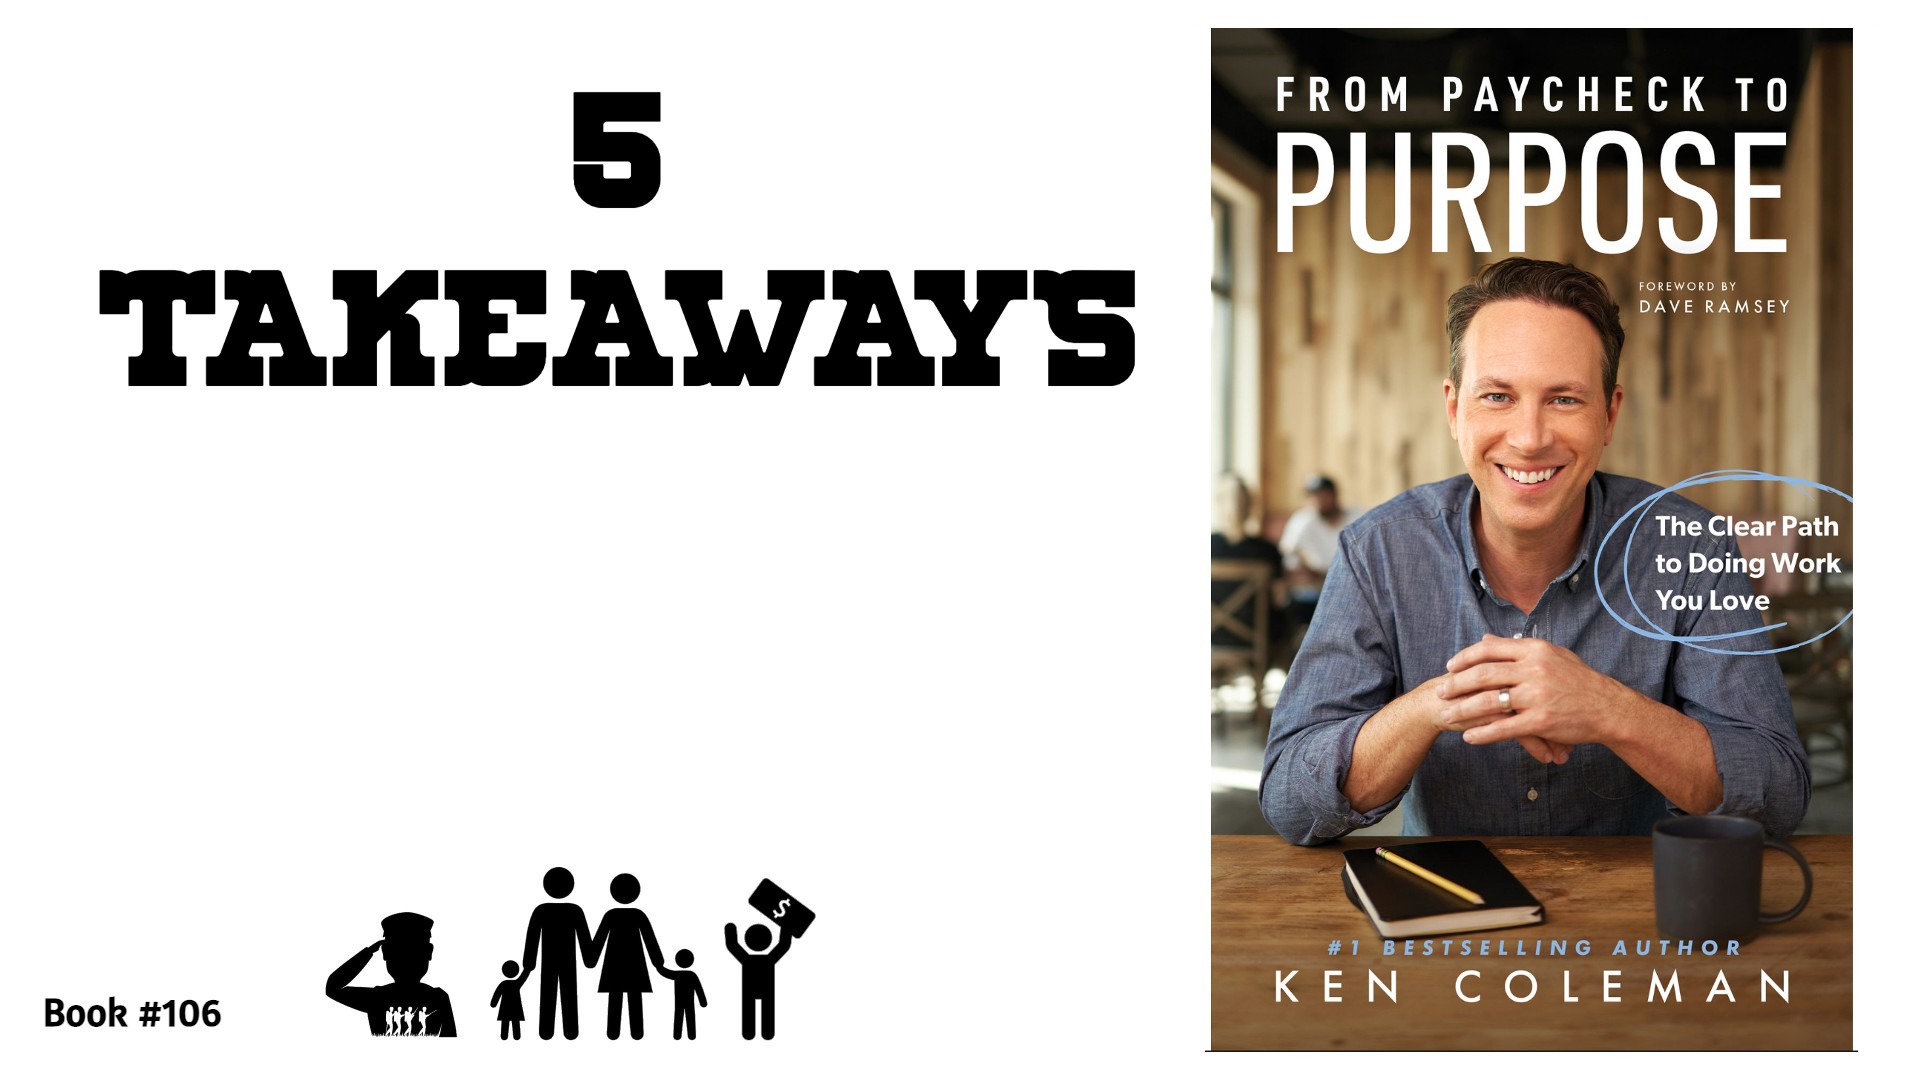 5 Takeaways from “From Paycheck to Purpose”